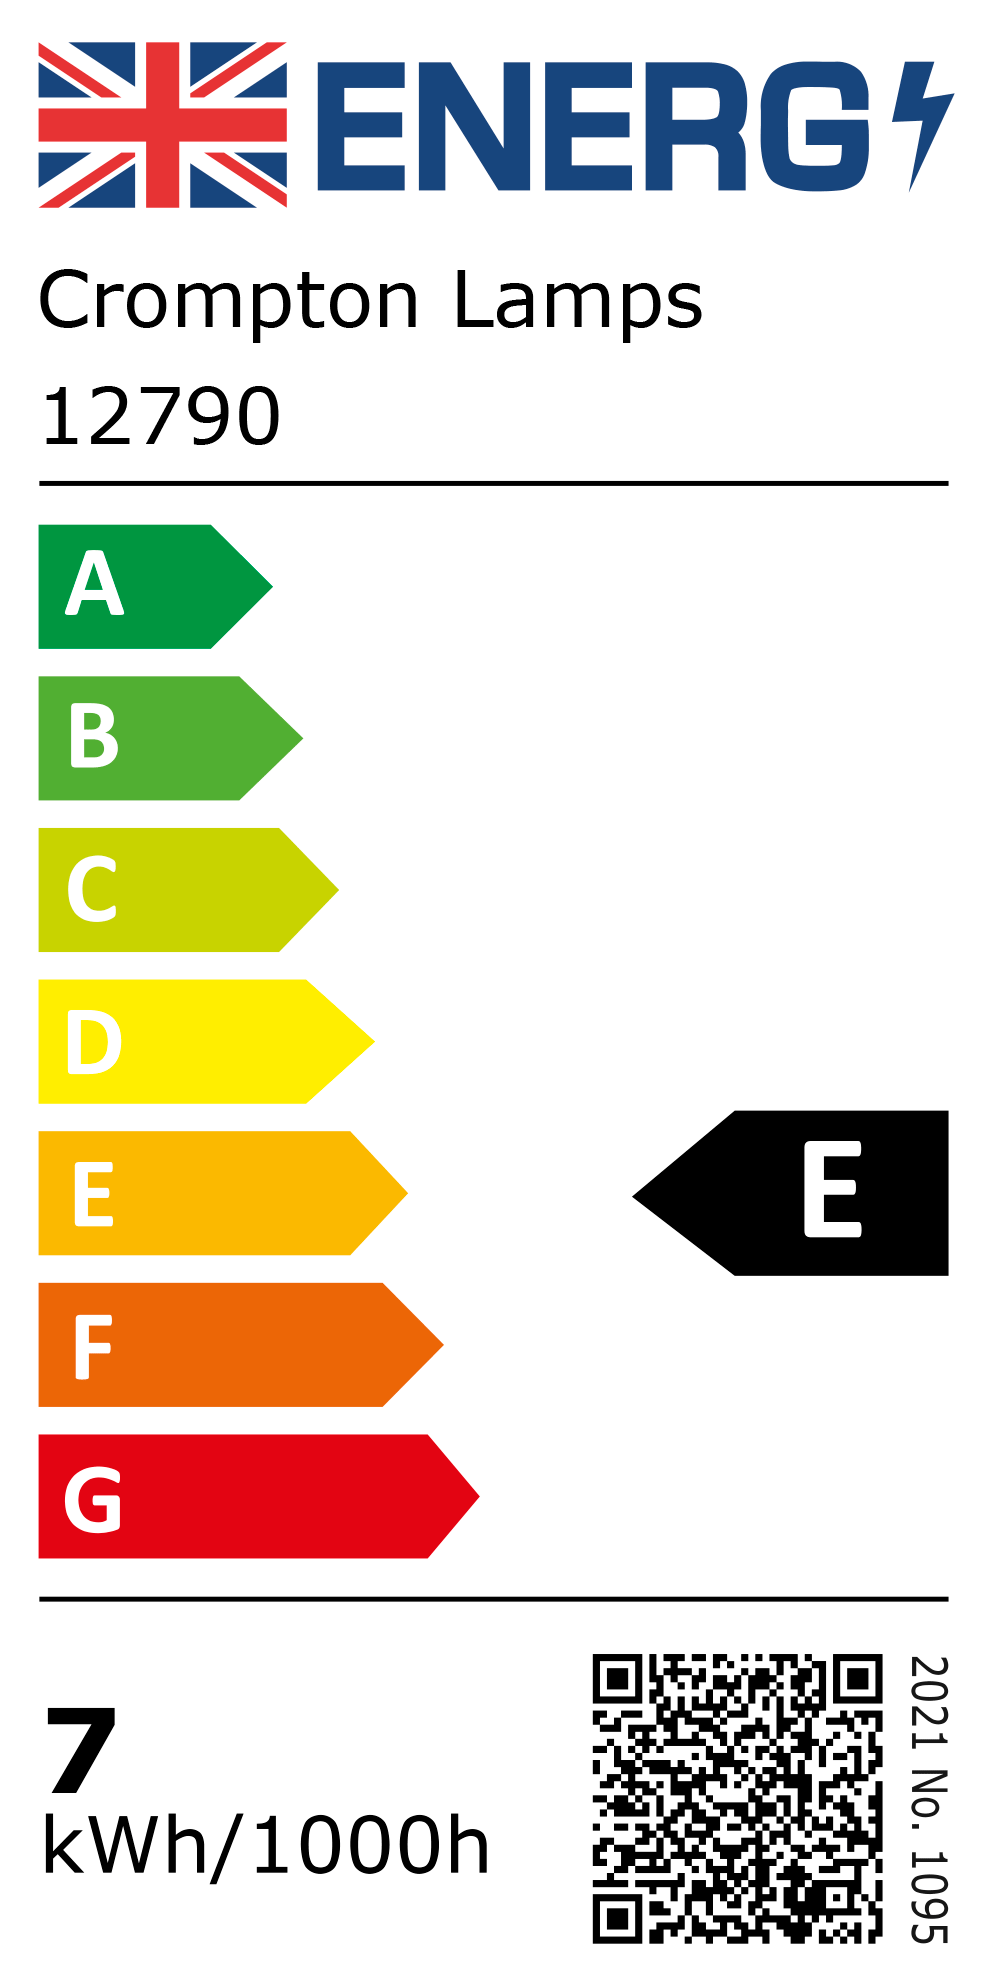 New 2021 Energy Rating Label: Stock Code 12790